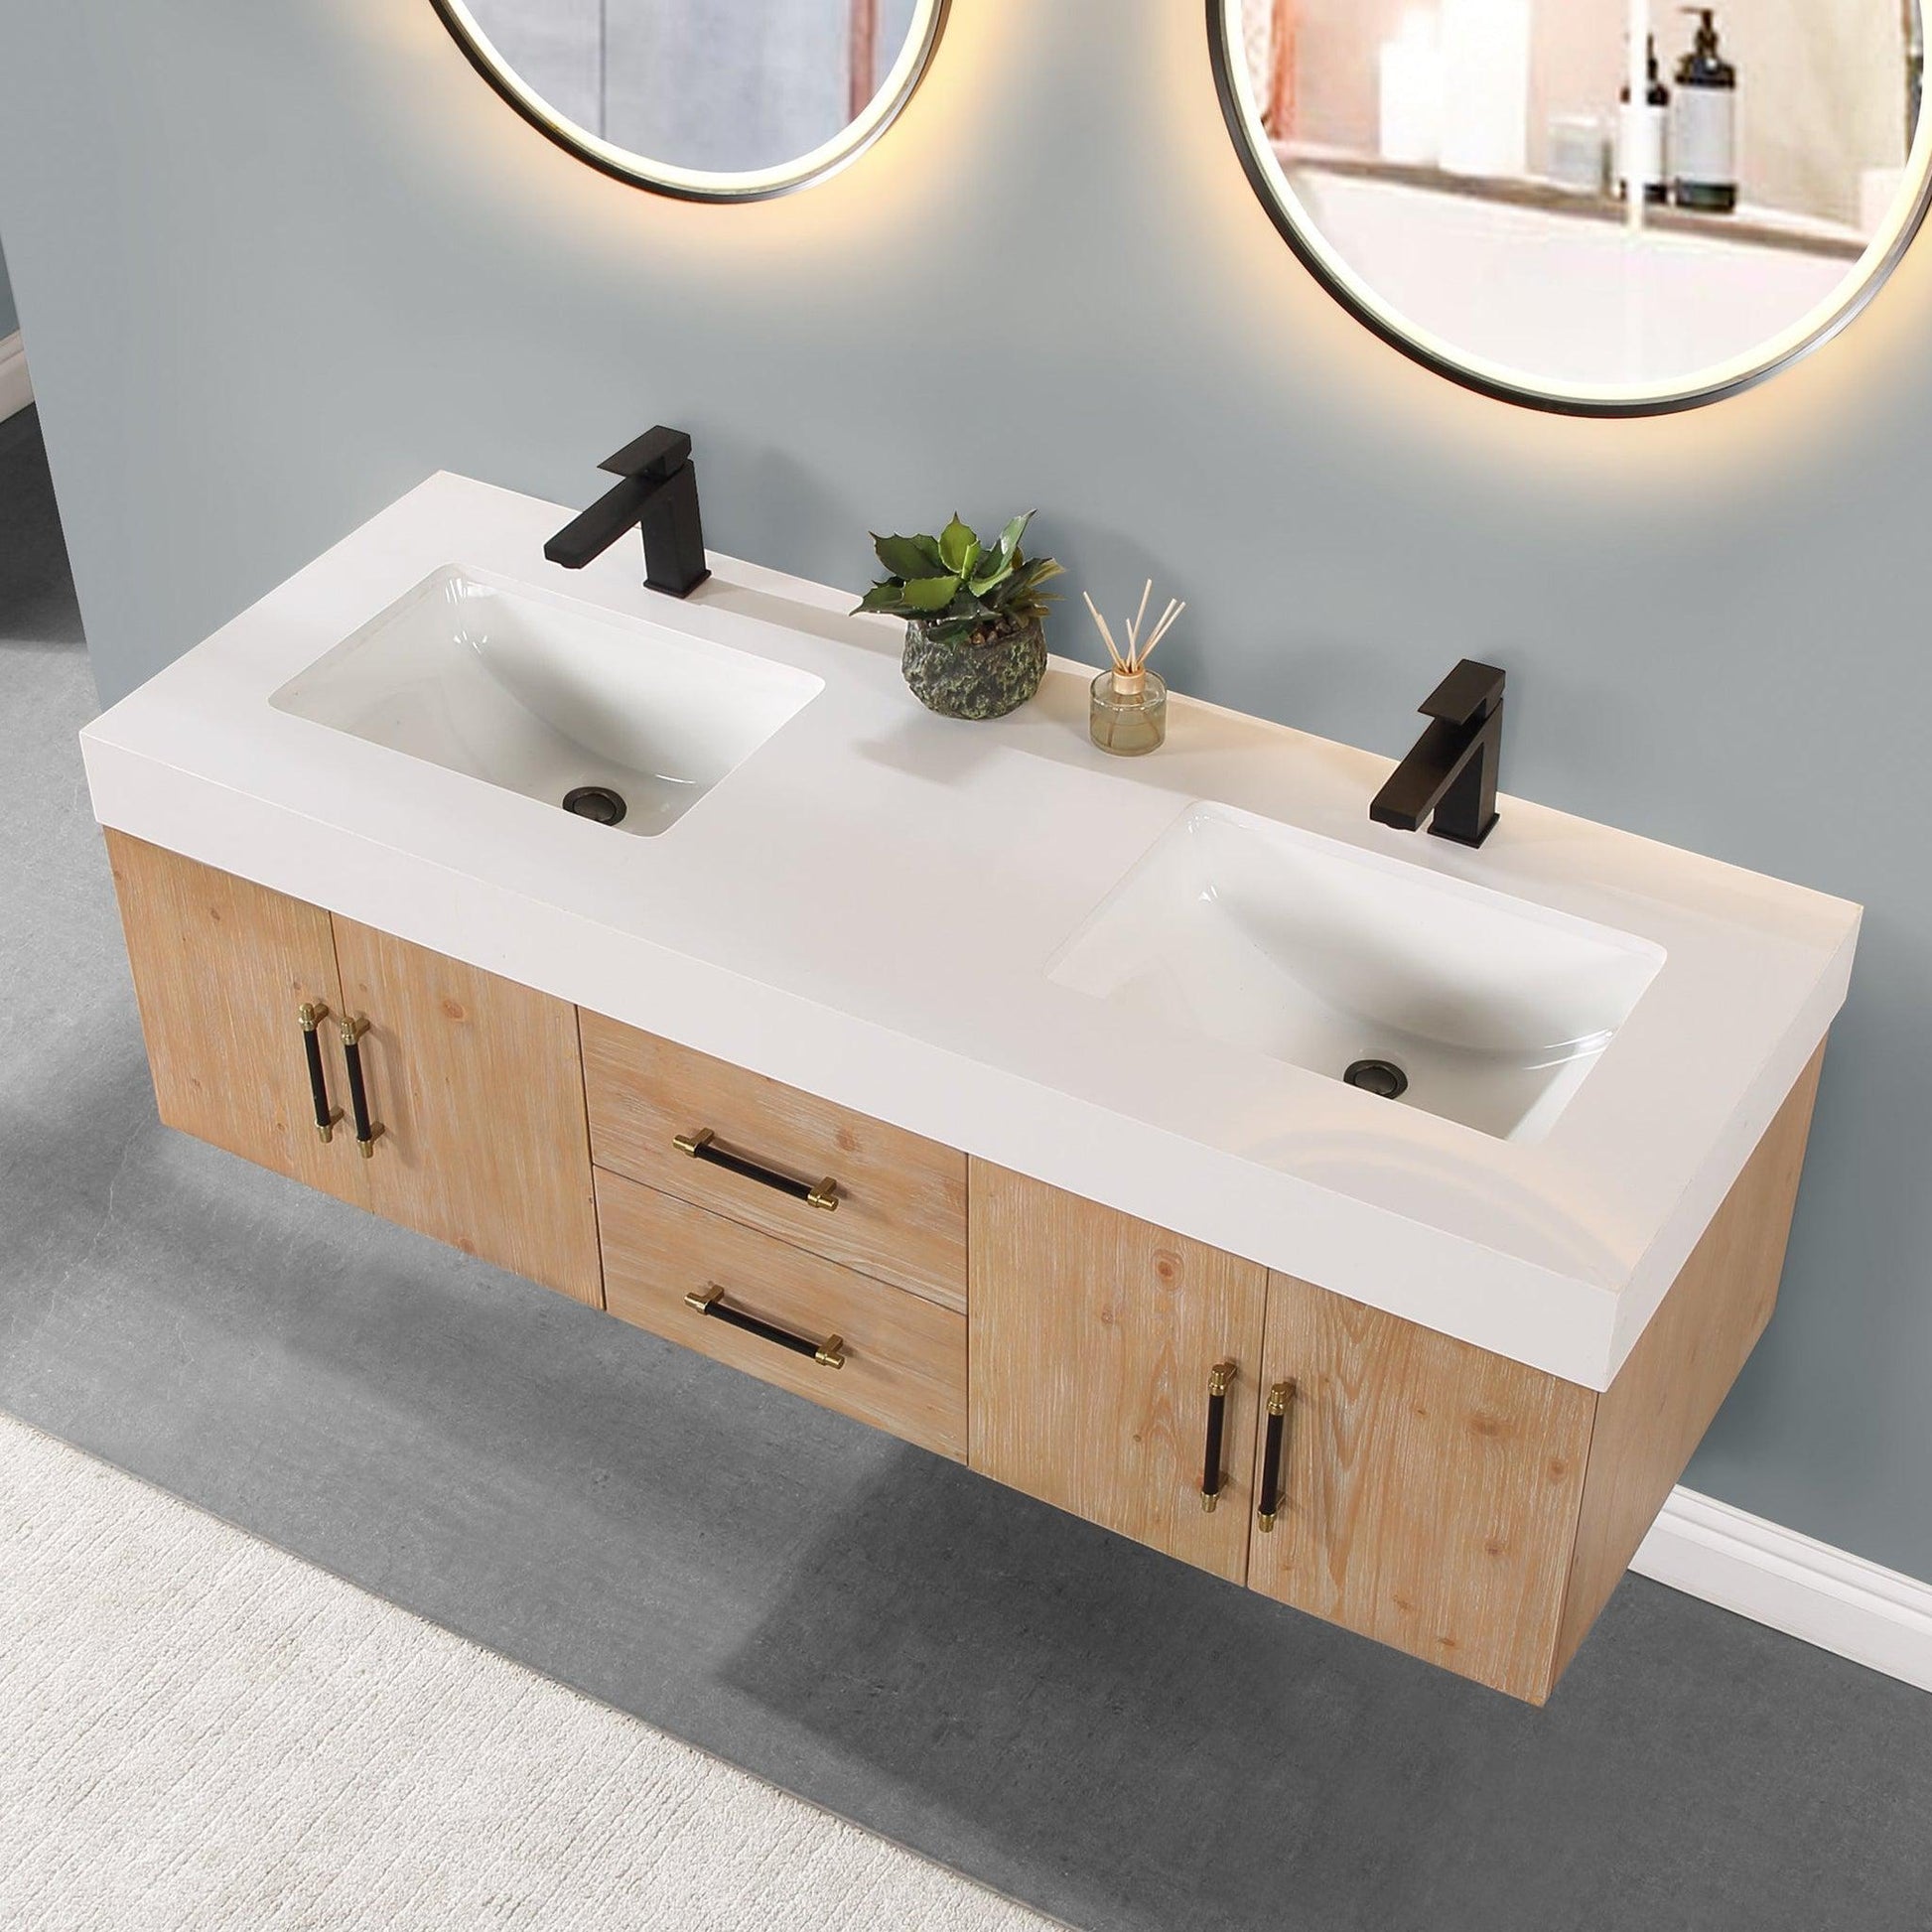 Altair Corchia 60" Light Brown Wall-Mounted Double Bathroom Vanity Set With White Composite Stone Top, Two Rectangular Undermount Ceramic Sinks, and Overflow